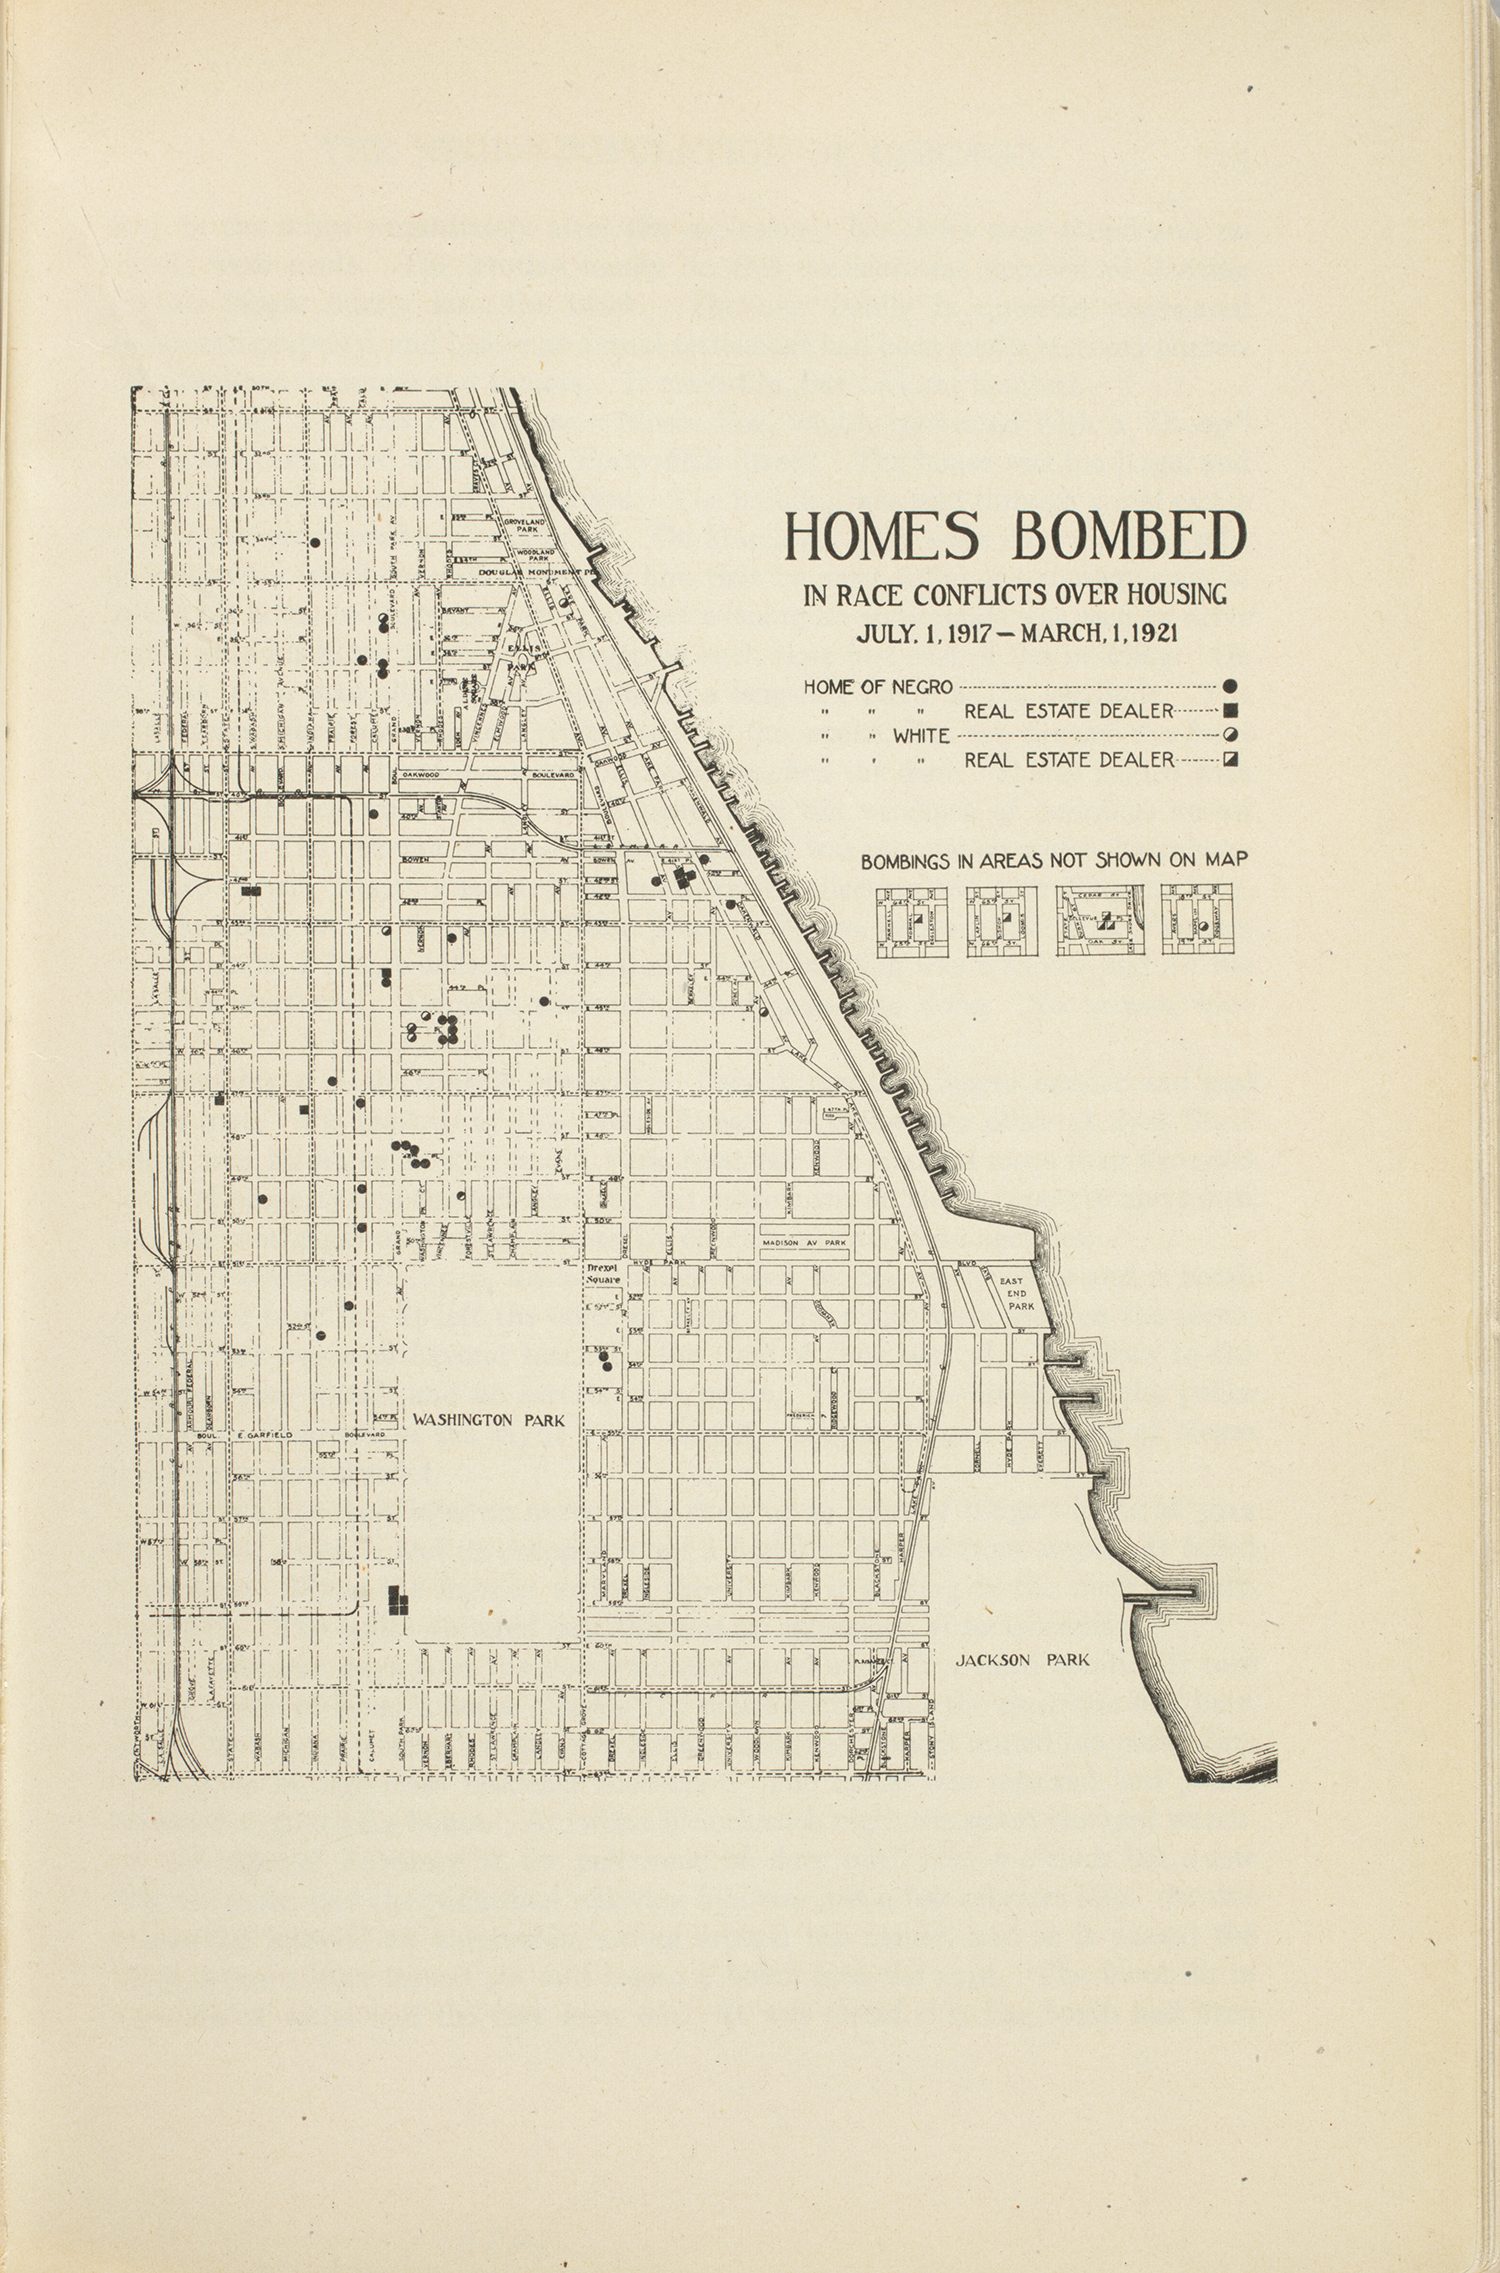 Map of Homes Bombed in Racial Conflicts over Housing, July 1, 1917-March 1, 1921.